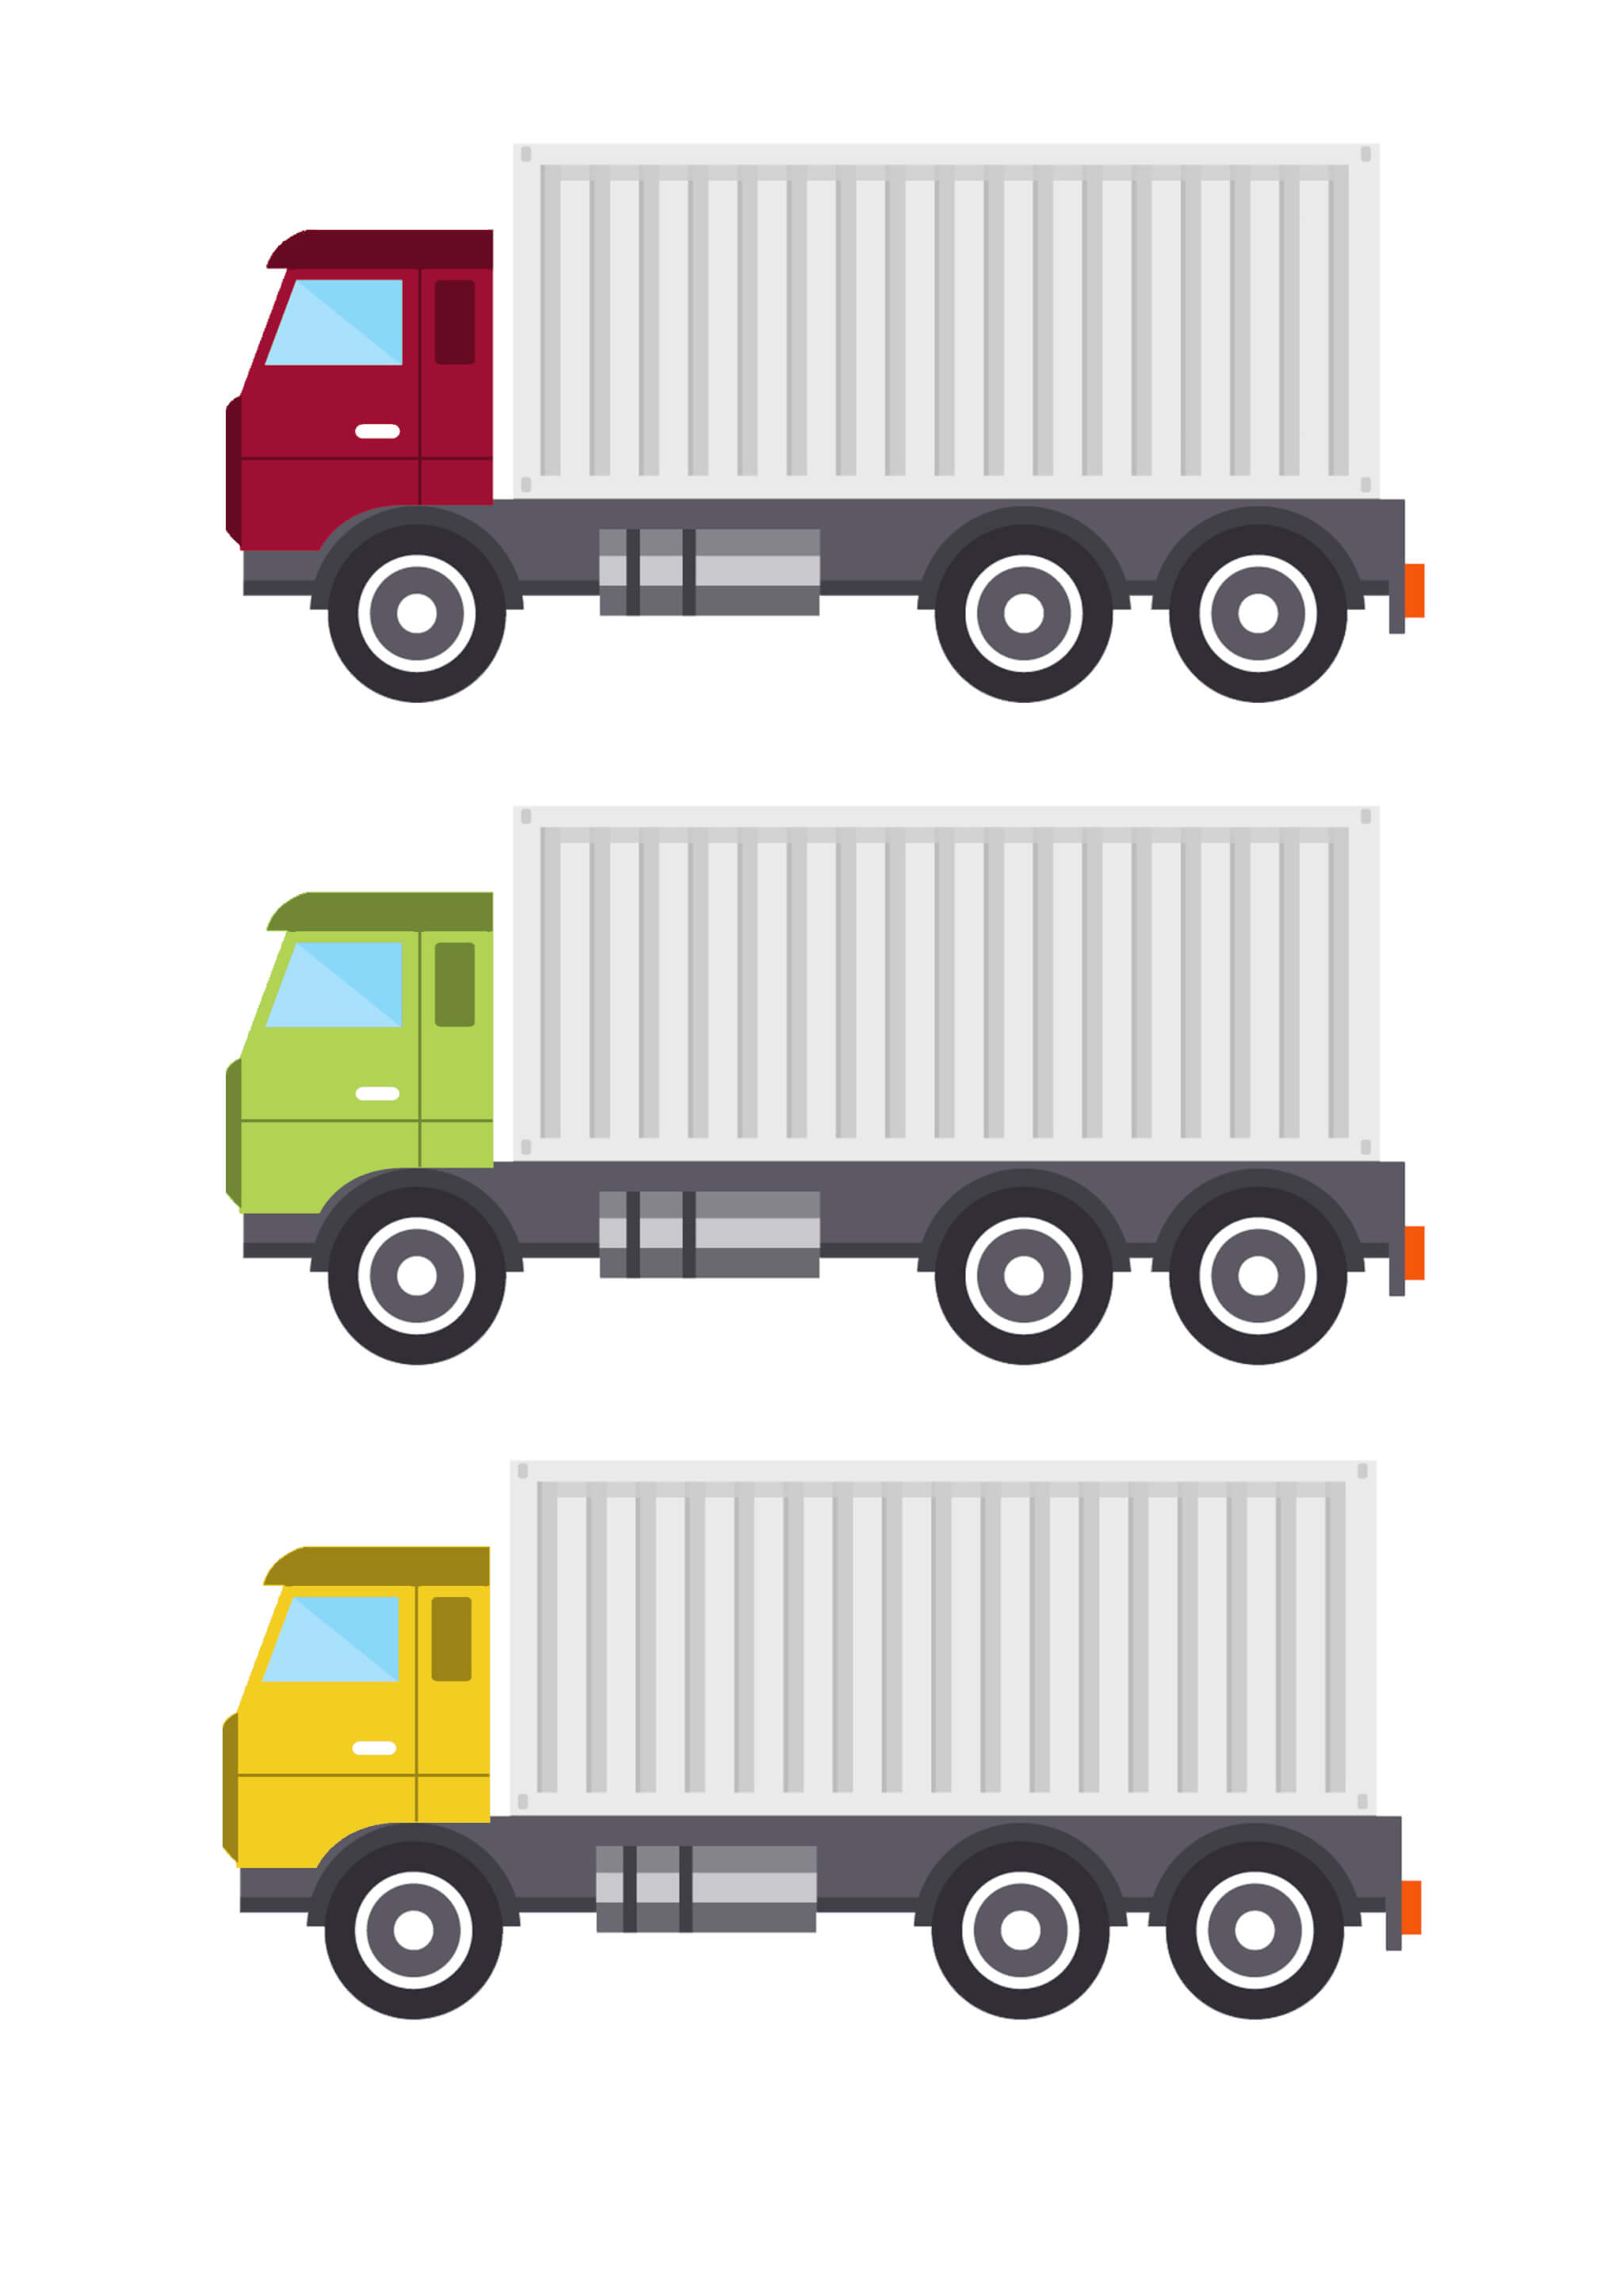 Printable Activity «What is carrying a truck?» - Image 3